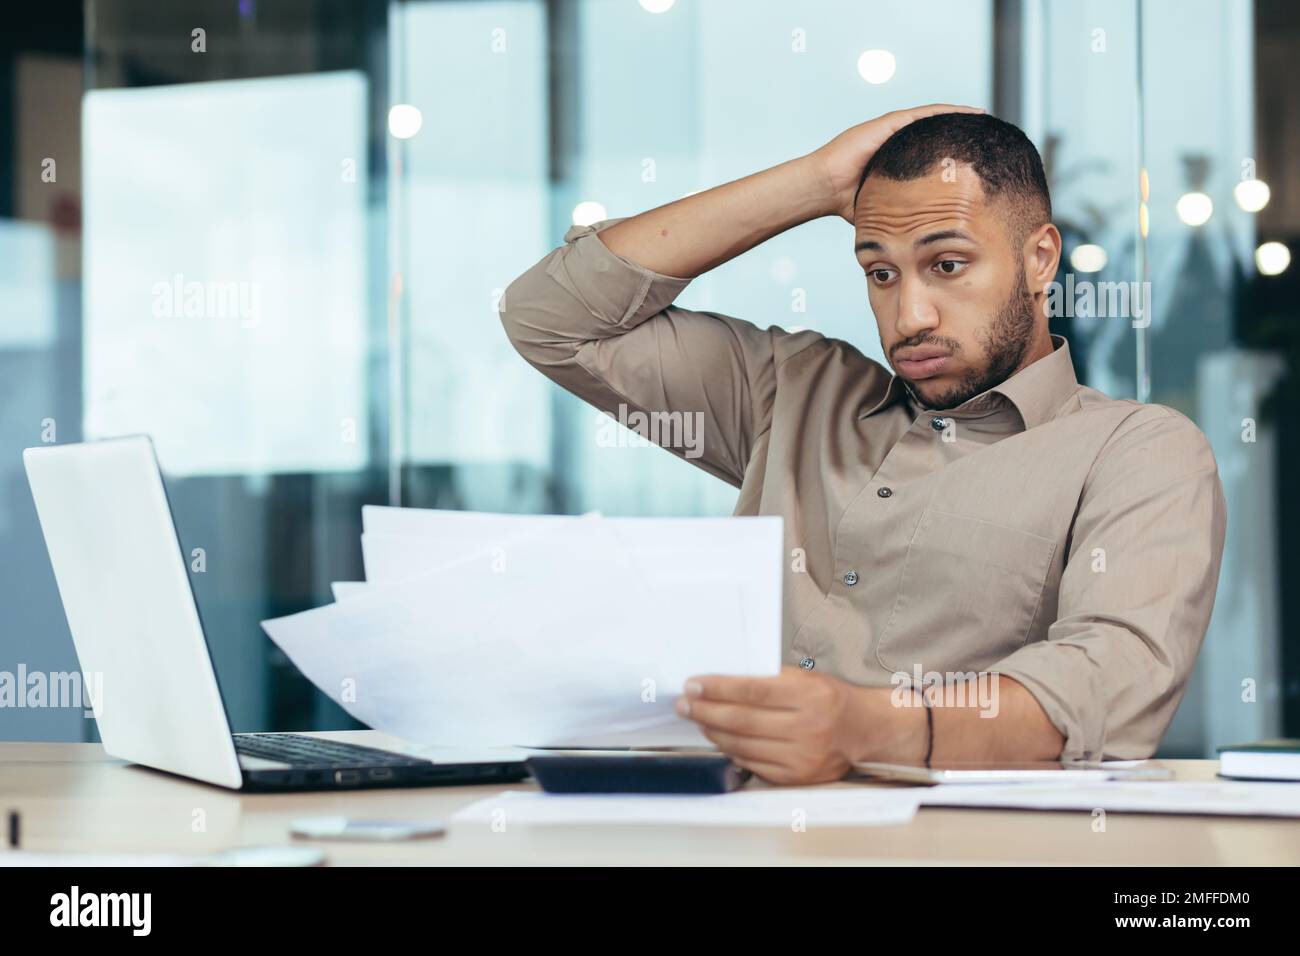 Worried young African American male student holding papers in hands. I received a letter, bad exam results, refusal of admission. Upset, holding his head. Stock Photo